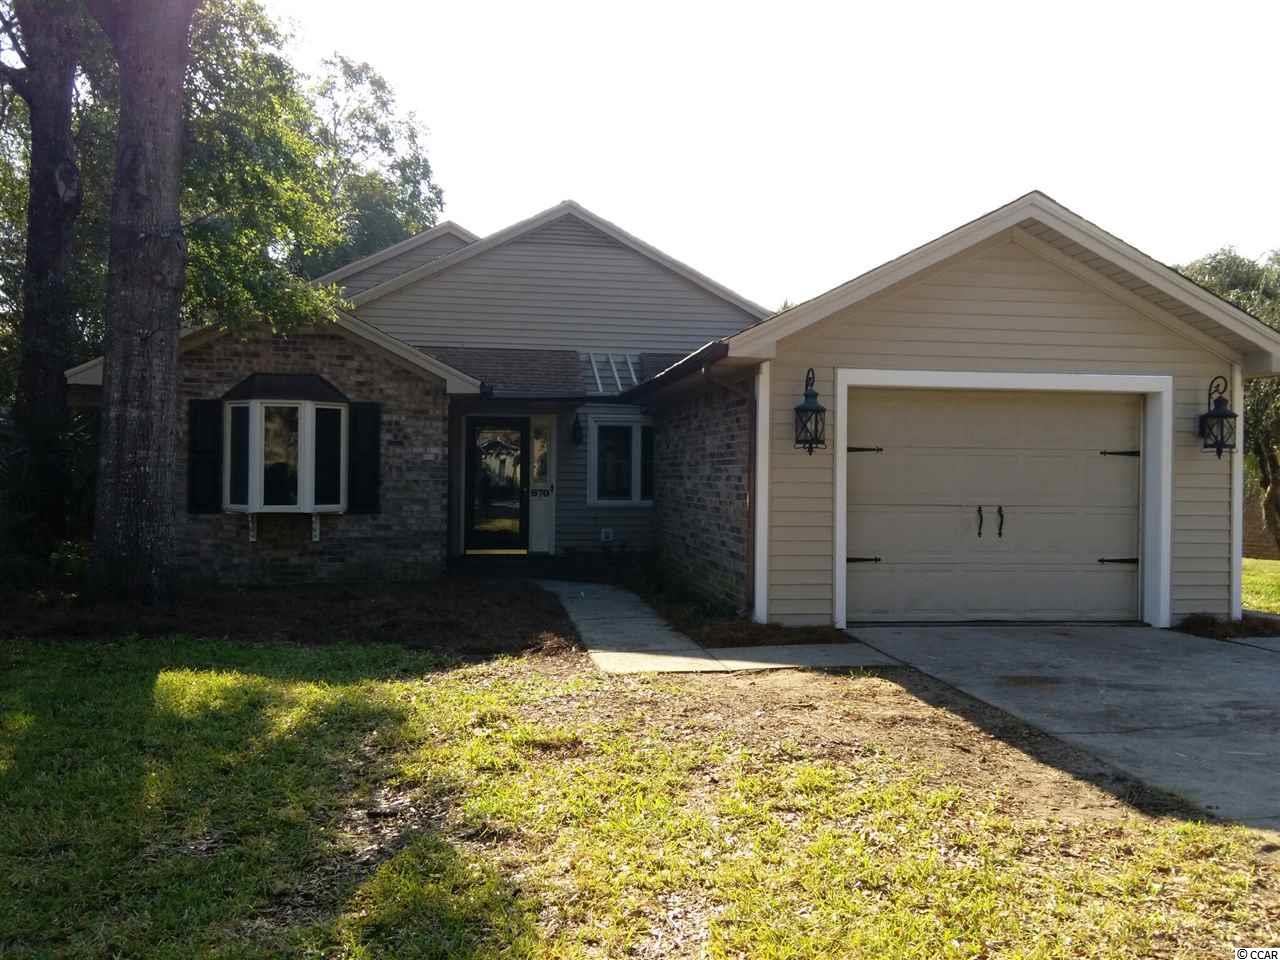 670 Mount Gilead Place Dr. Murrells Inlet, SC 29576